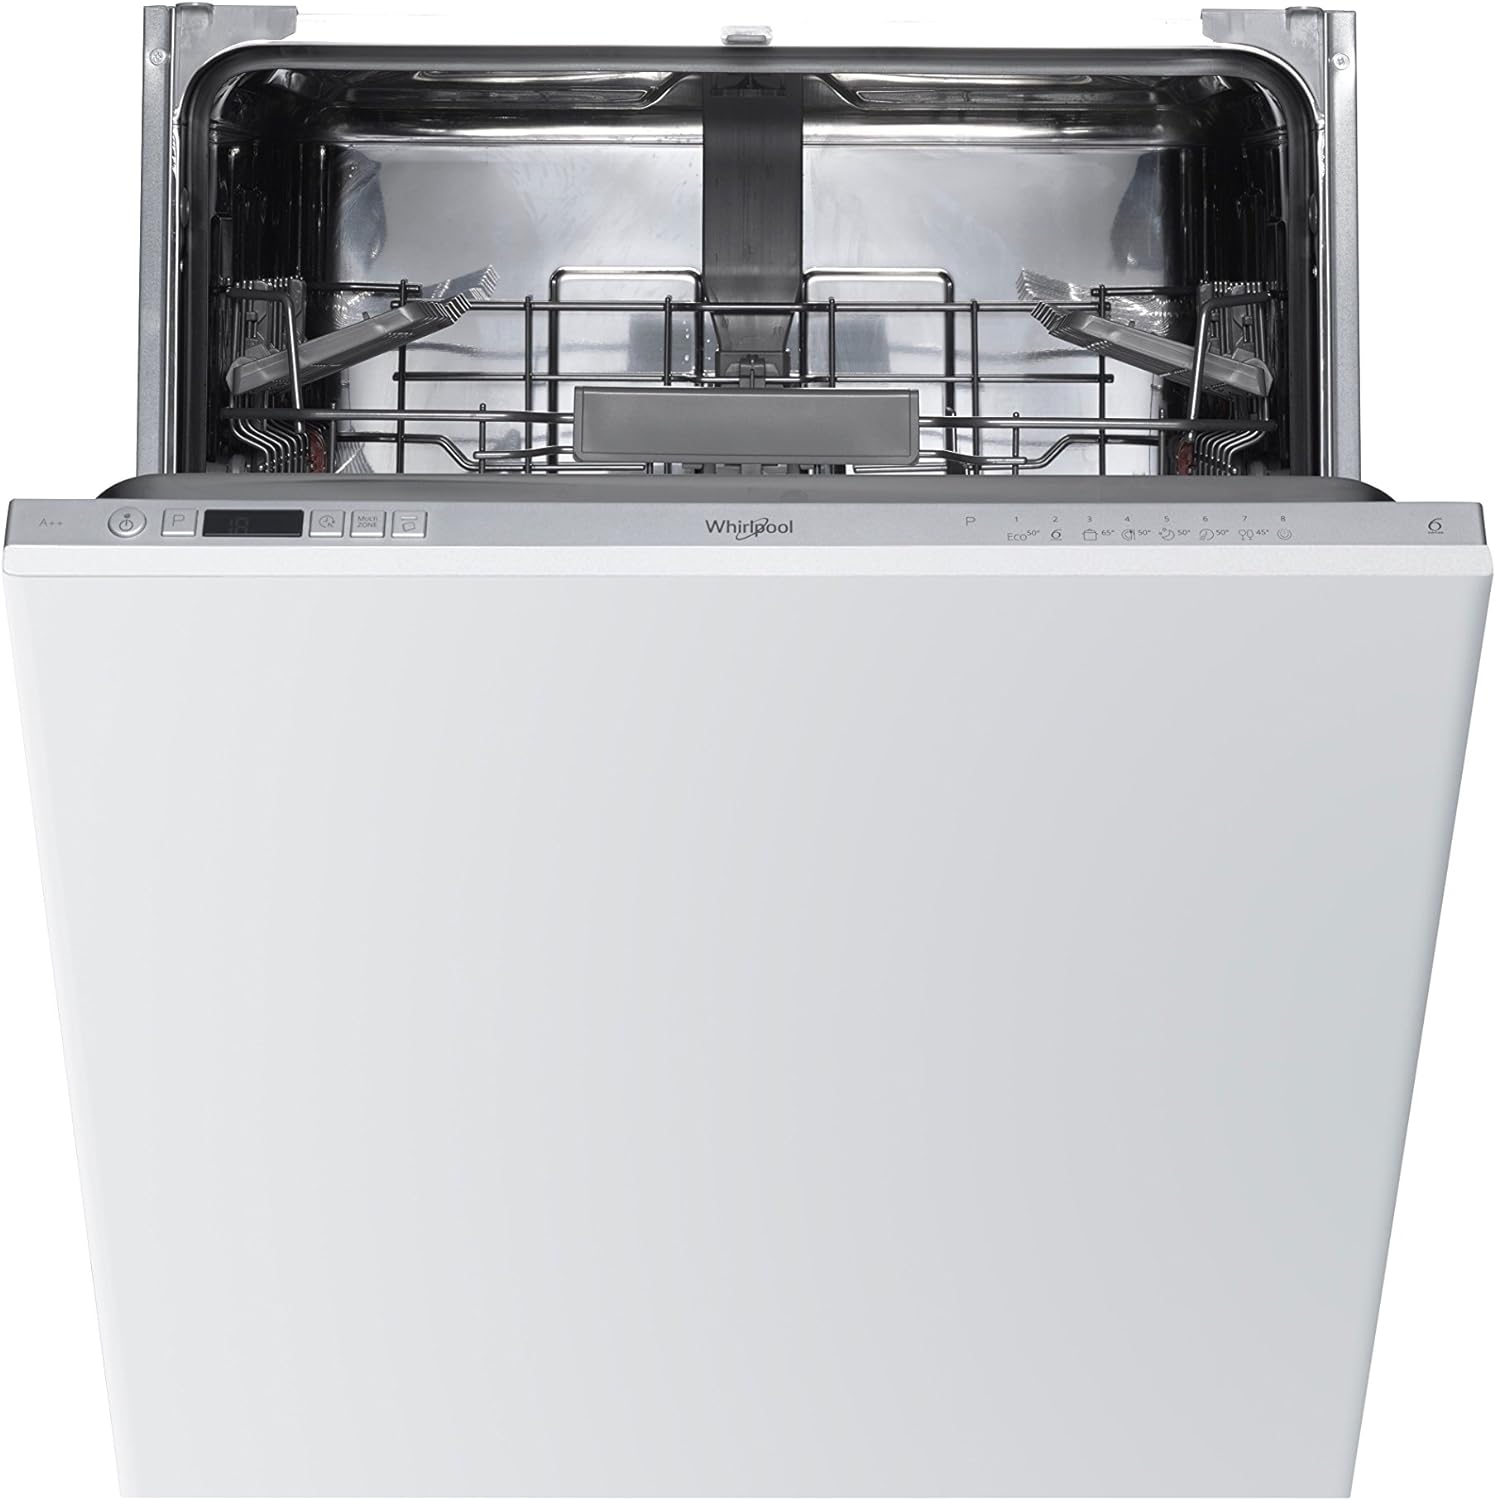 Whirlpool WIC 3C26 UK Integrated Standard Dishwasher, 14 Place Settings, 8 Programs - Amazing Gadgets Outlet